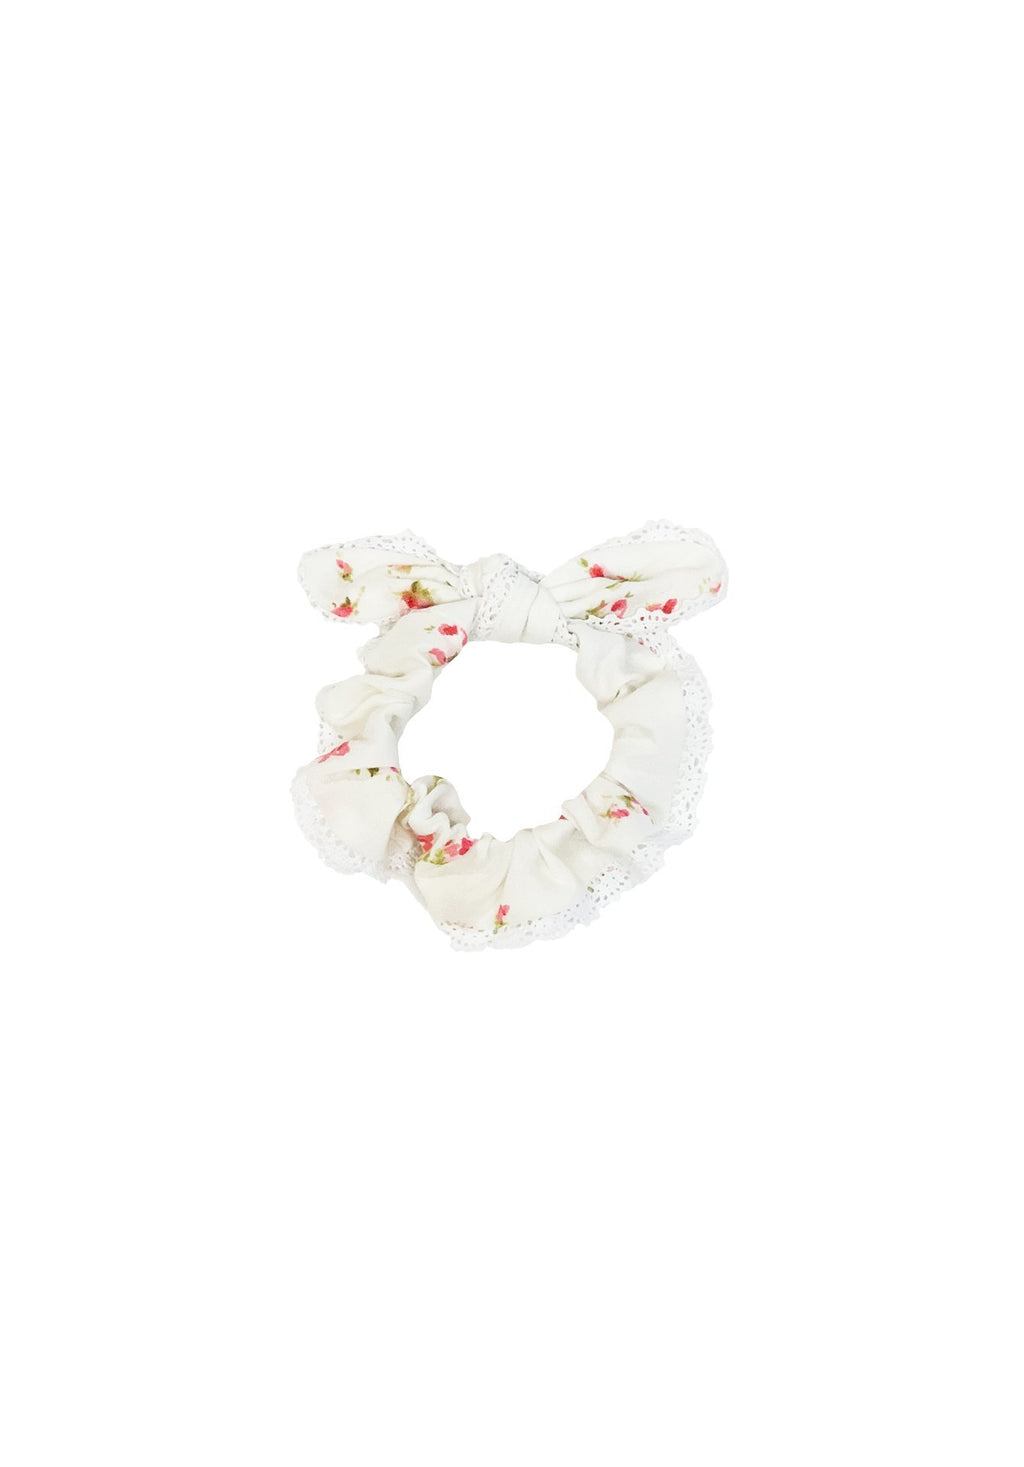 Bow Tie Lace Scrunchy- The Penelope Hair Tie - Vintage Floral (Shipping Included) - MERRITT CHARLES